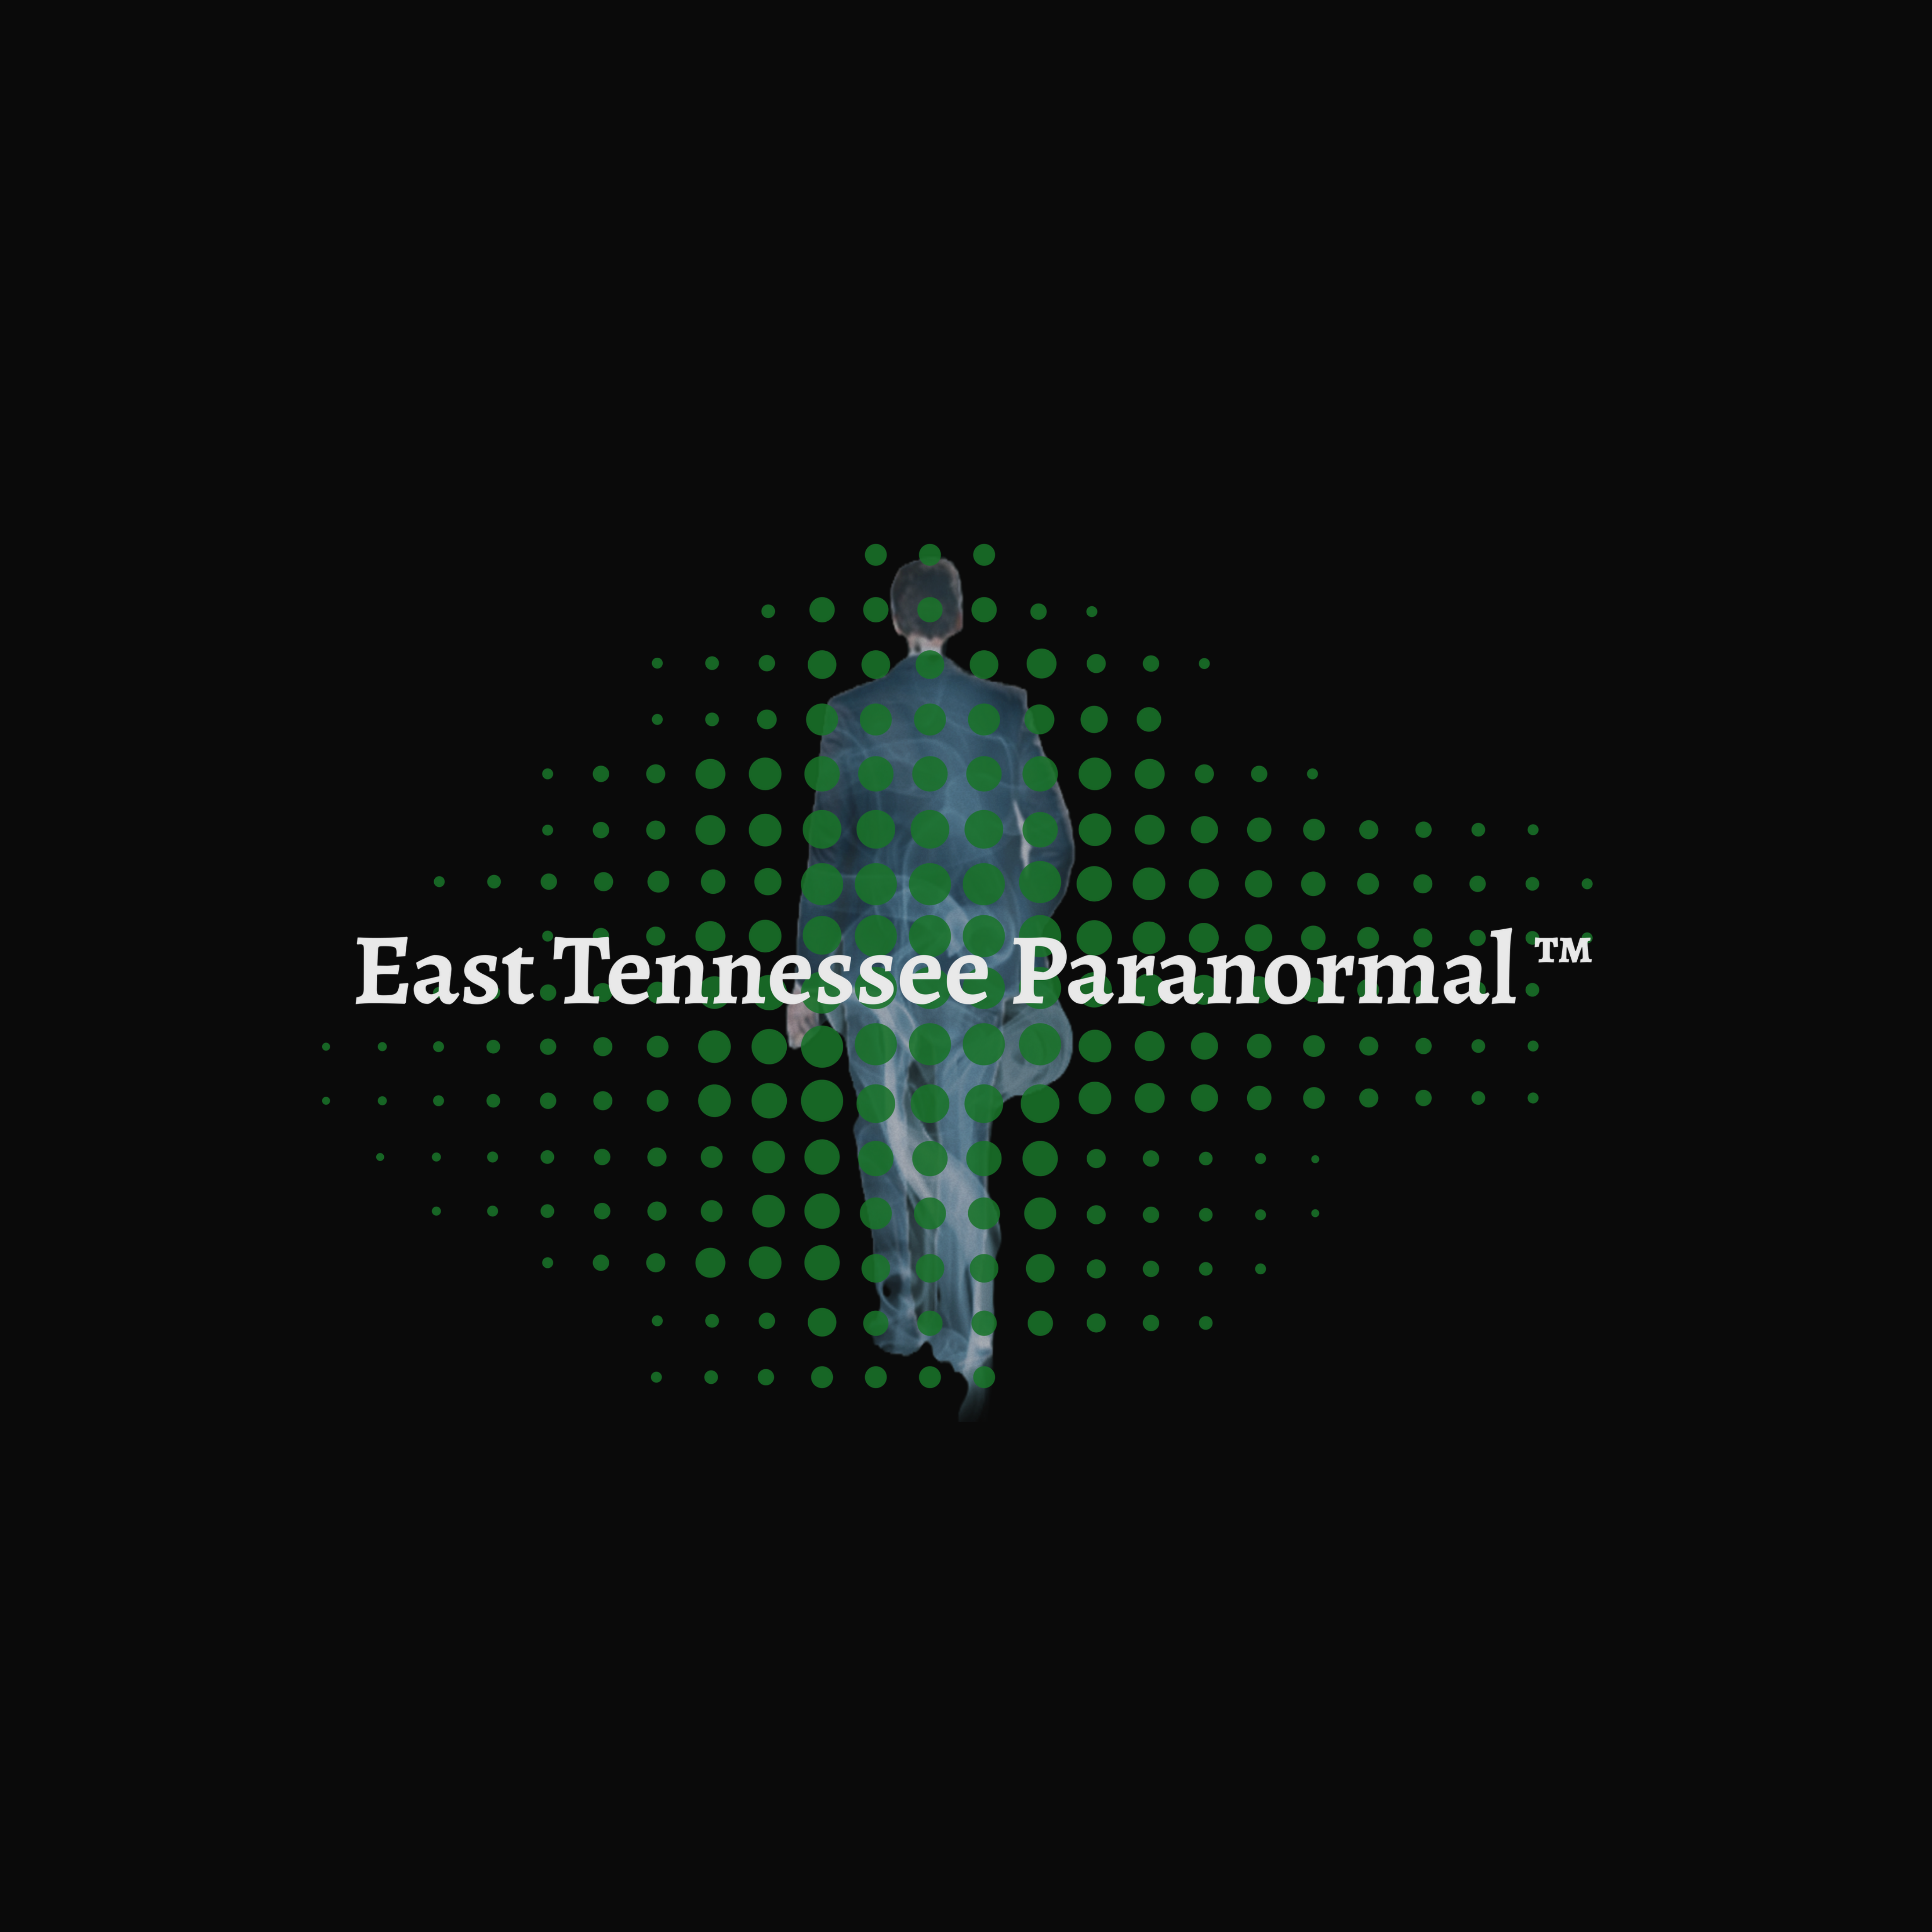 East Tennessee Paranormal Logo